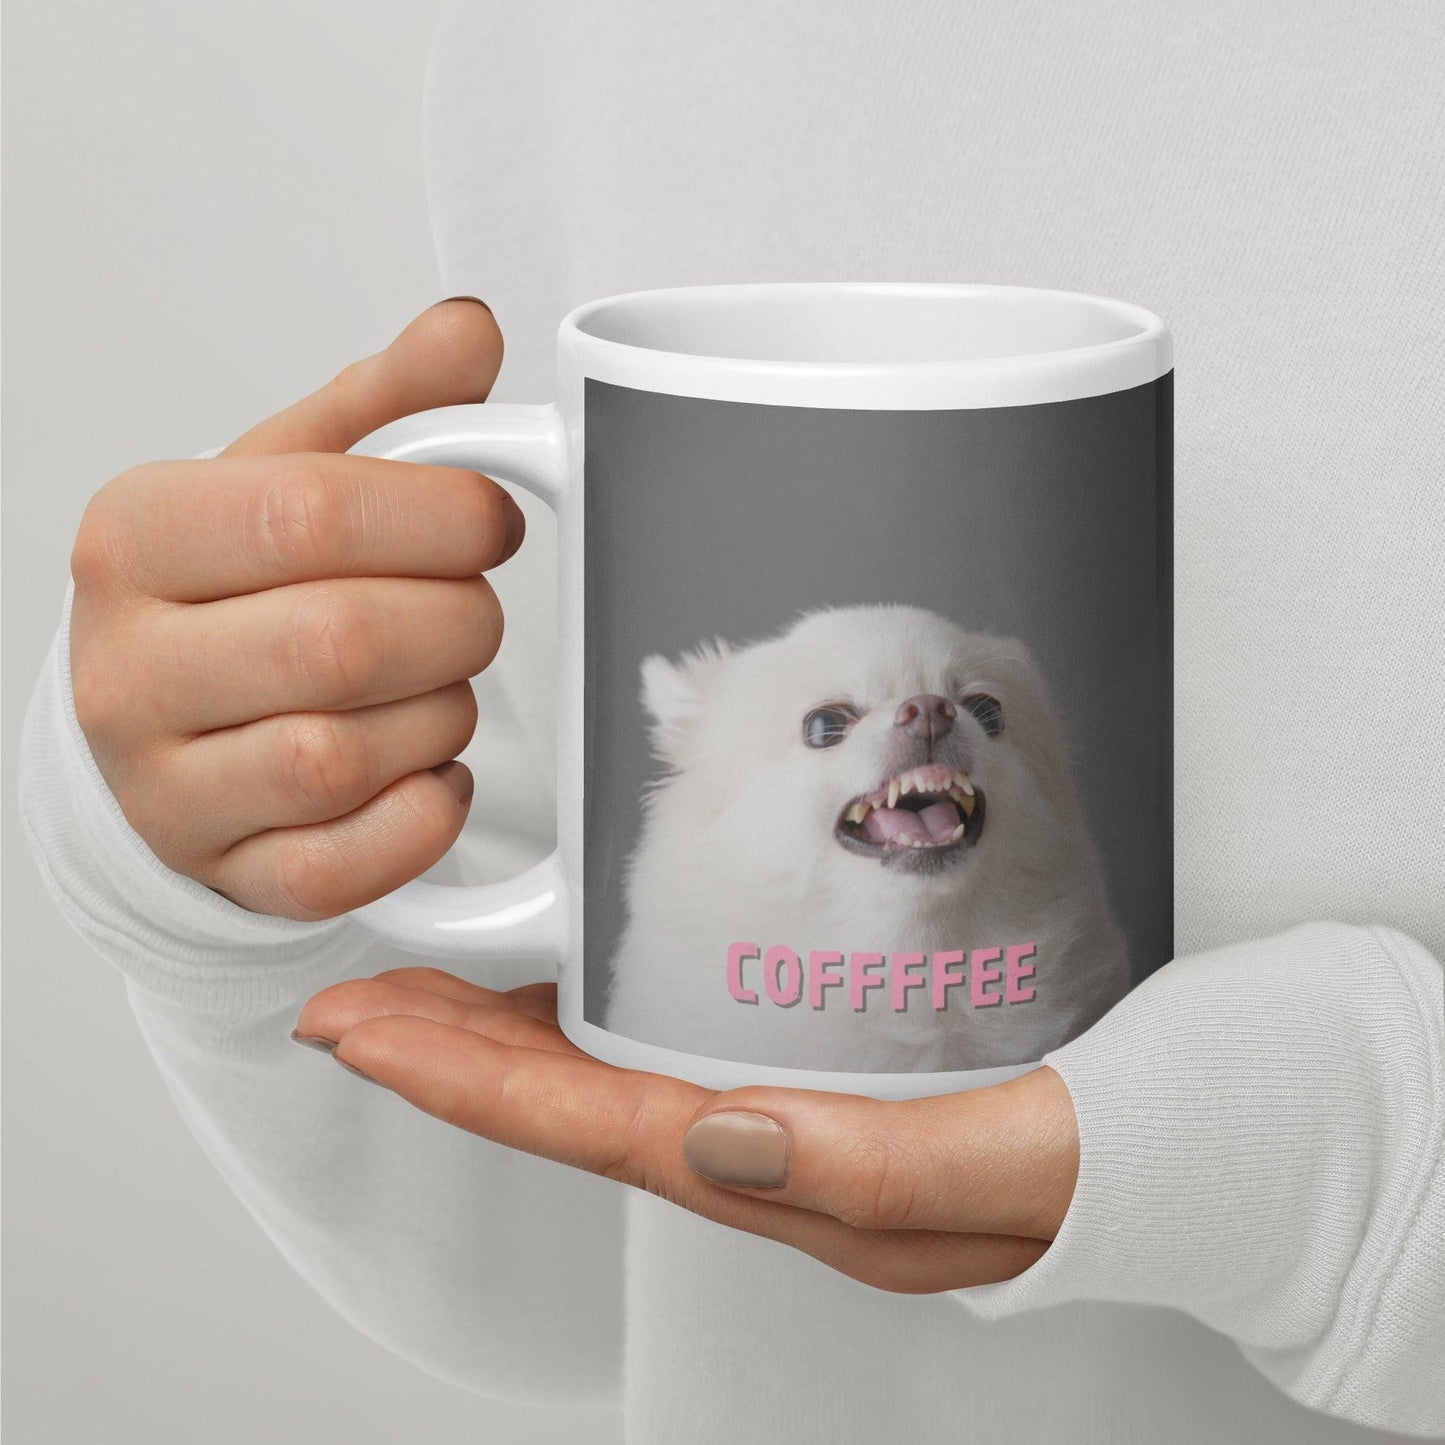 COFFFFEE - chihuahua meme coffee mug.  A cute and fluffy white chihuahua is feeling tetchy first thing in the morning and barking - snapping - their order for coffee. (Top of the morning to you too, coffee diva.) Best shut up and put the kettle on already! This adorable chihuahua meme mug makes a funny yet stylish gift idea for someone who loves chihuahuas and coffee. Or a warning to everyone that you're not a morning person.